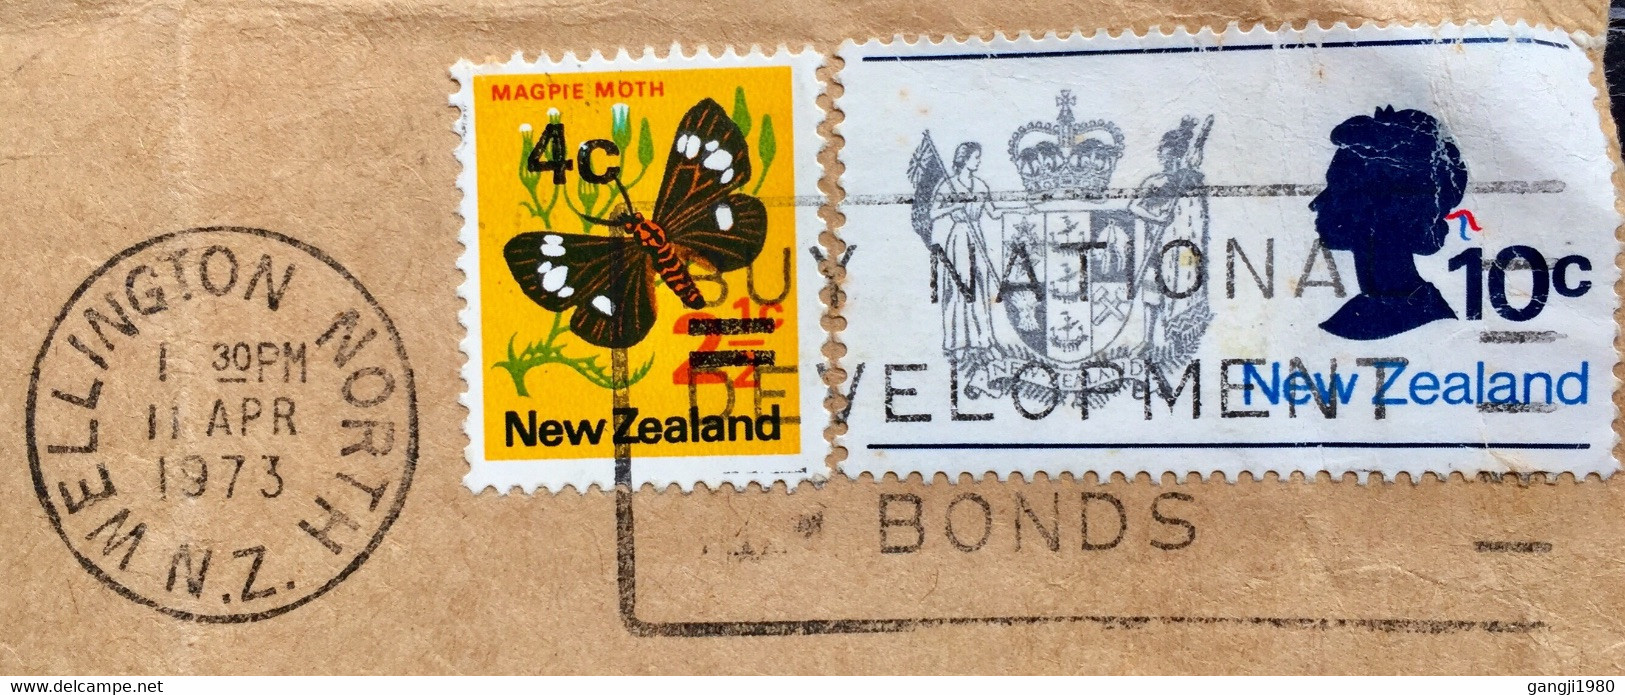 NEW ZEALAND 1973 ,BUY NATIONAL DEVELOPMENT BONDS SLOGAN,EMBASSY OF INDONESIA,USED COVER BUTTERFLY,EAGLE,QUEEN - Storia Postale